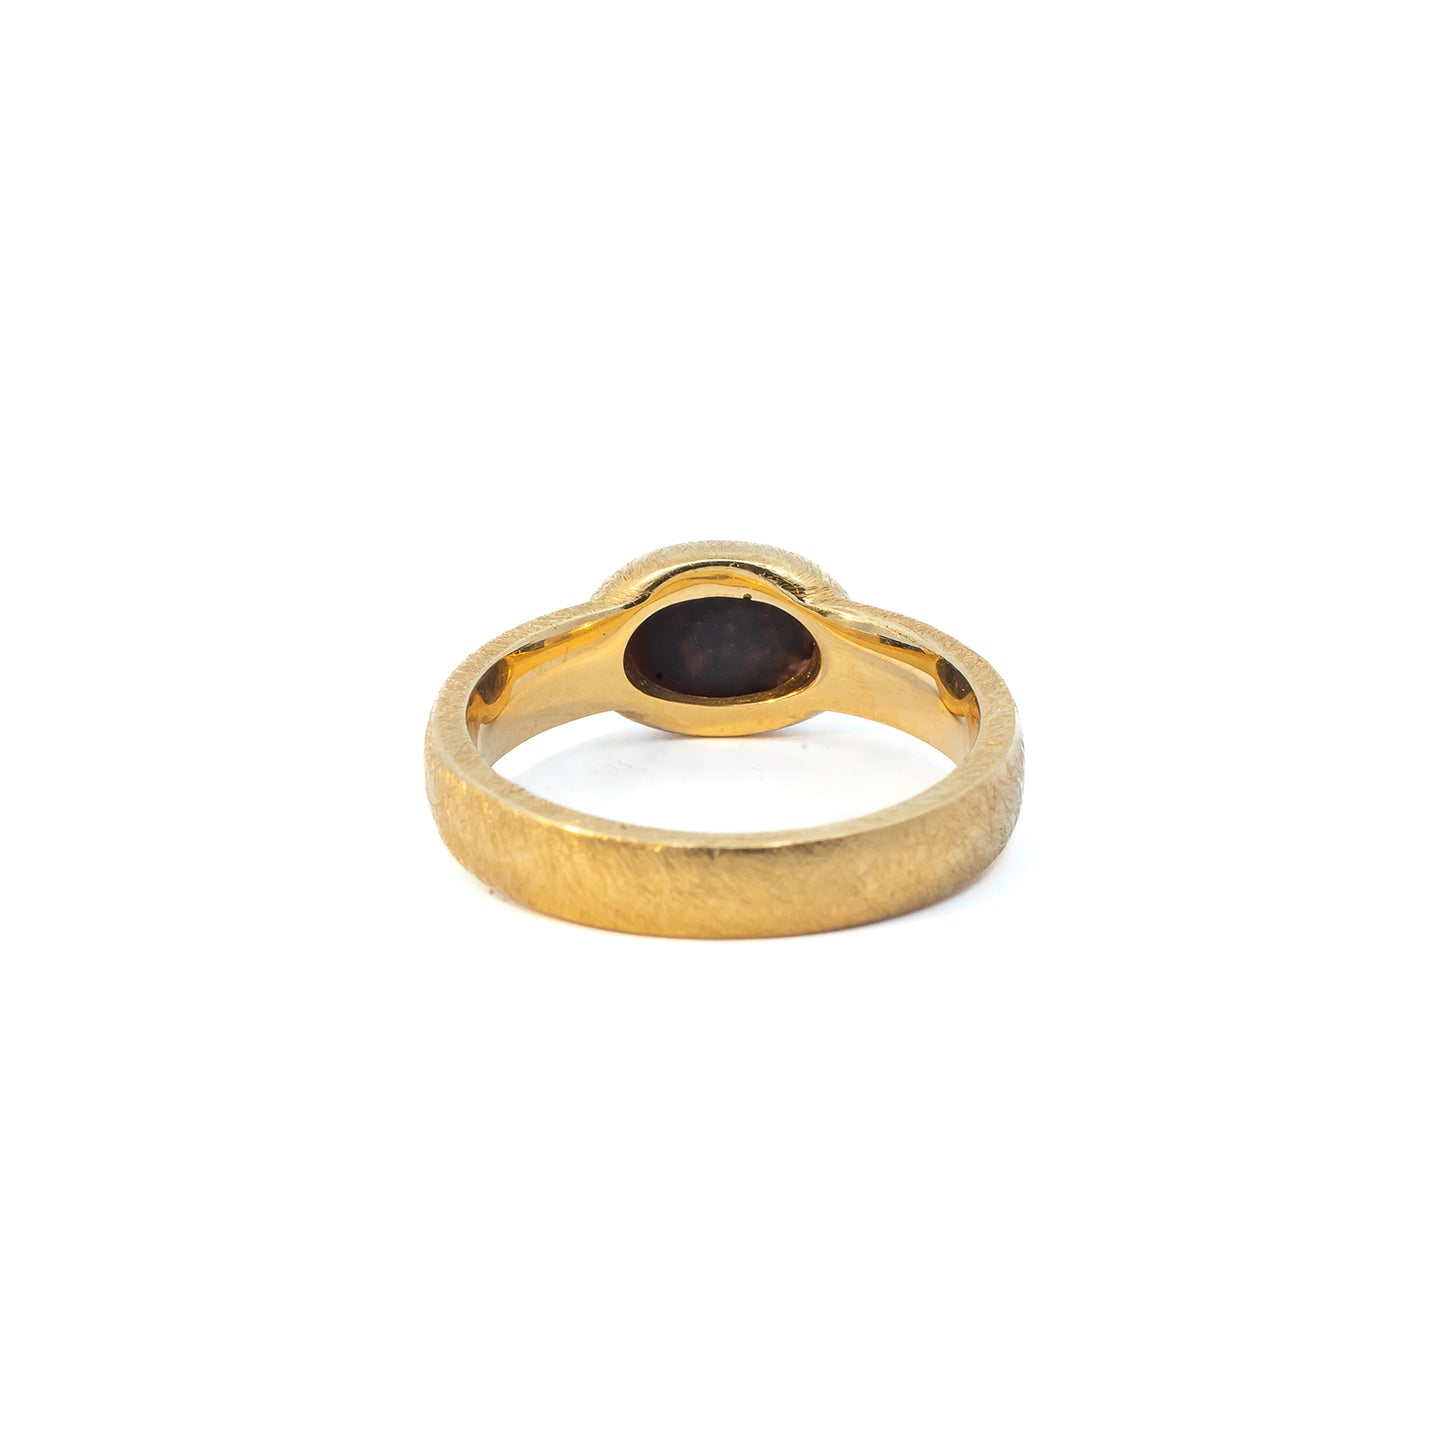 Gemstone Ring Opaldoublette Yellow Gold 18K Women's Jewelry Band Ring Gold Ring 